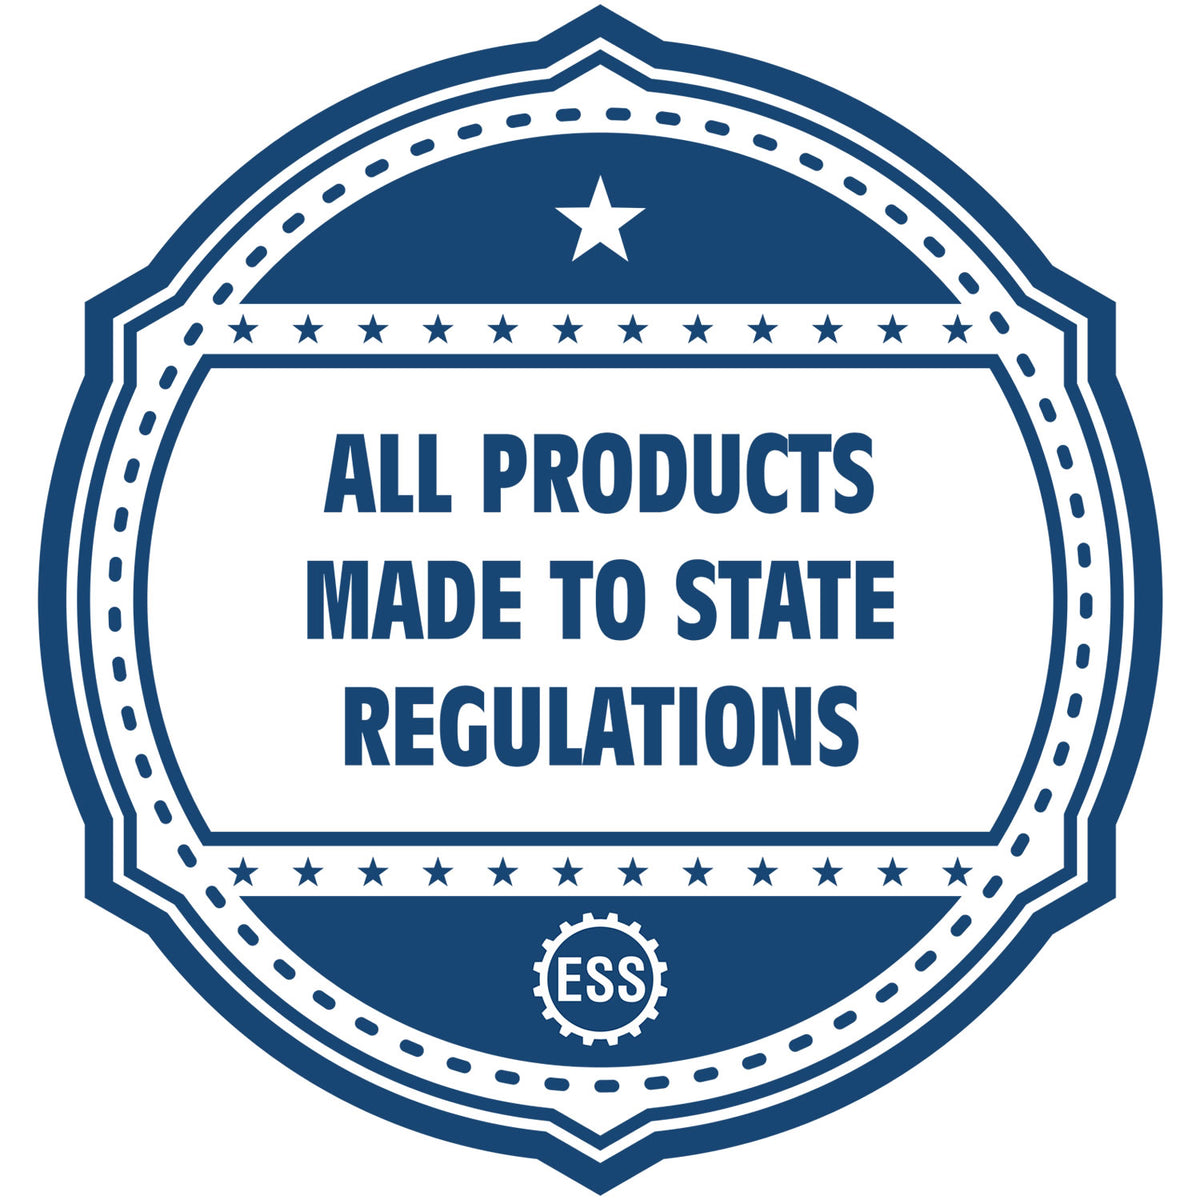 An icon or badge element for the Idaho Desk Architect Embossing Seal showing that this product is made in compliance with state regulations.